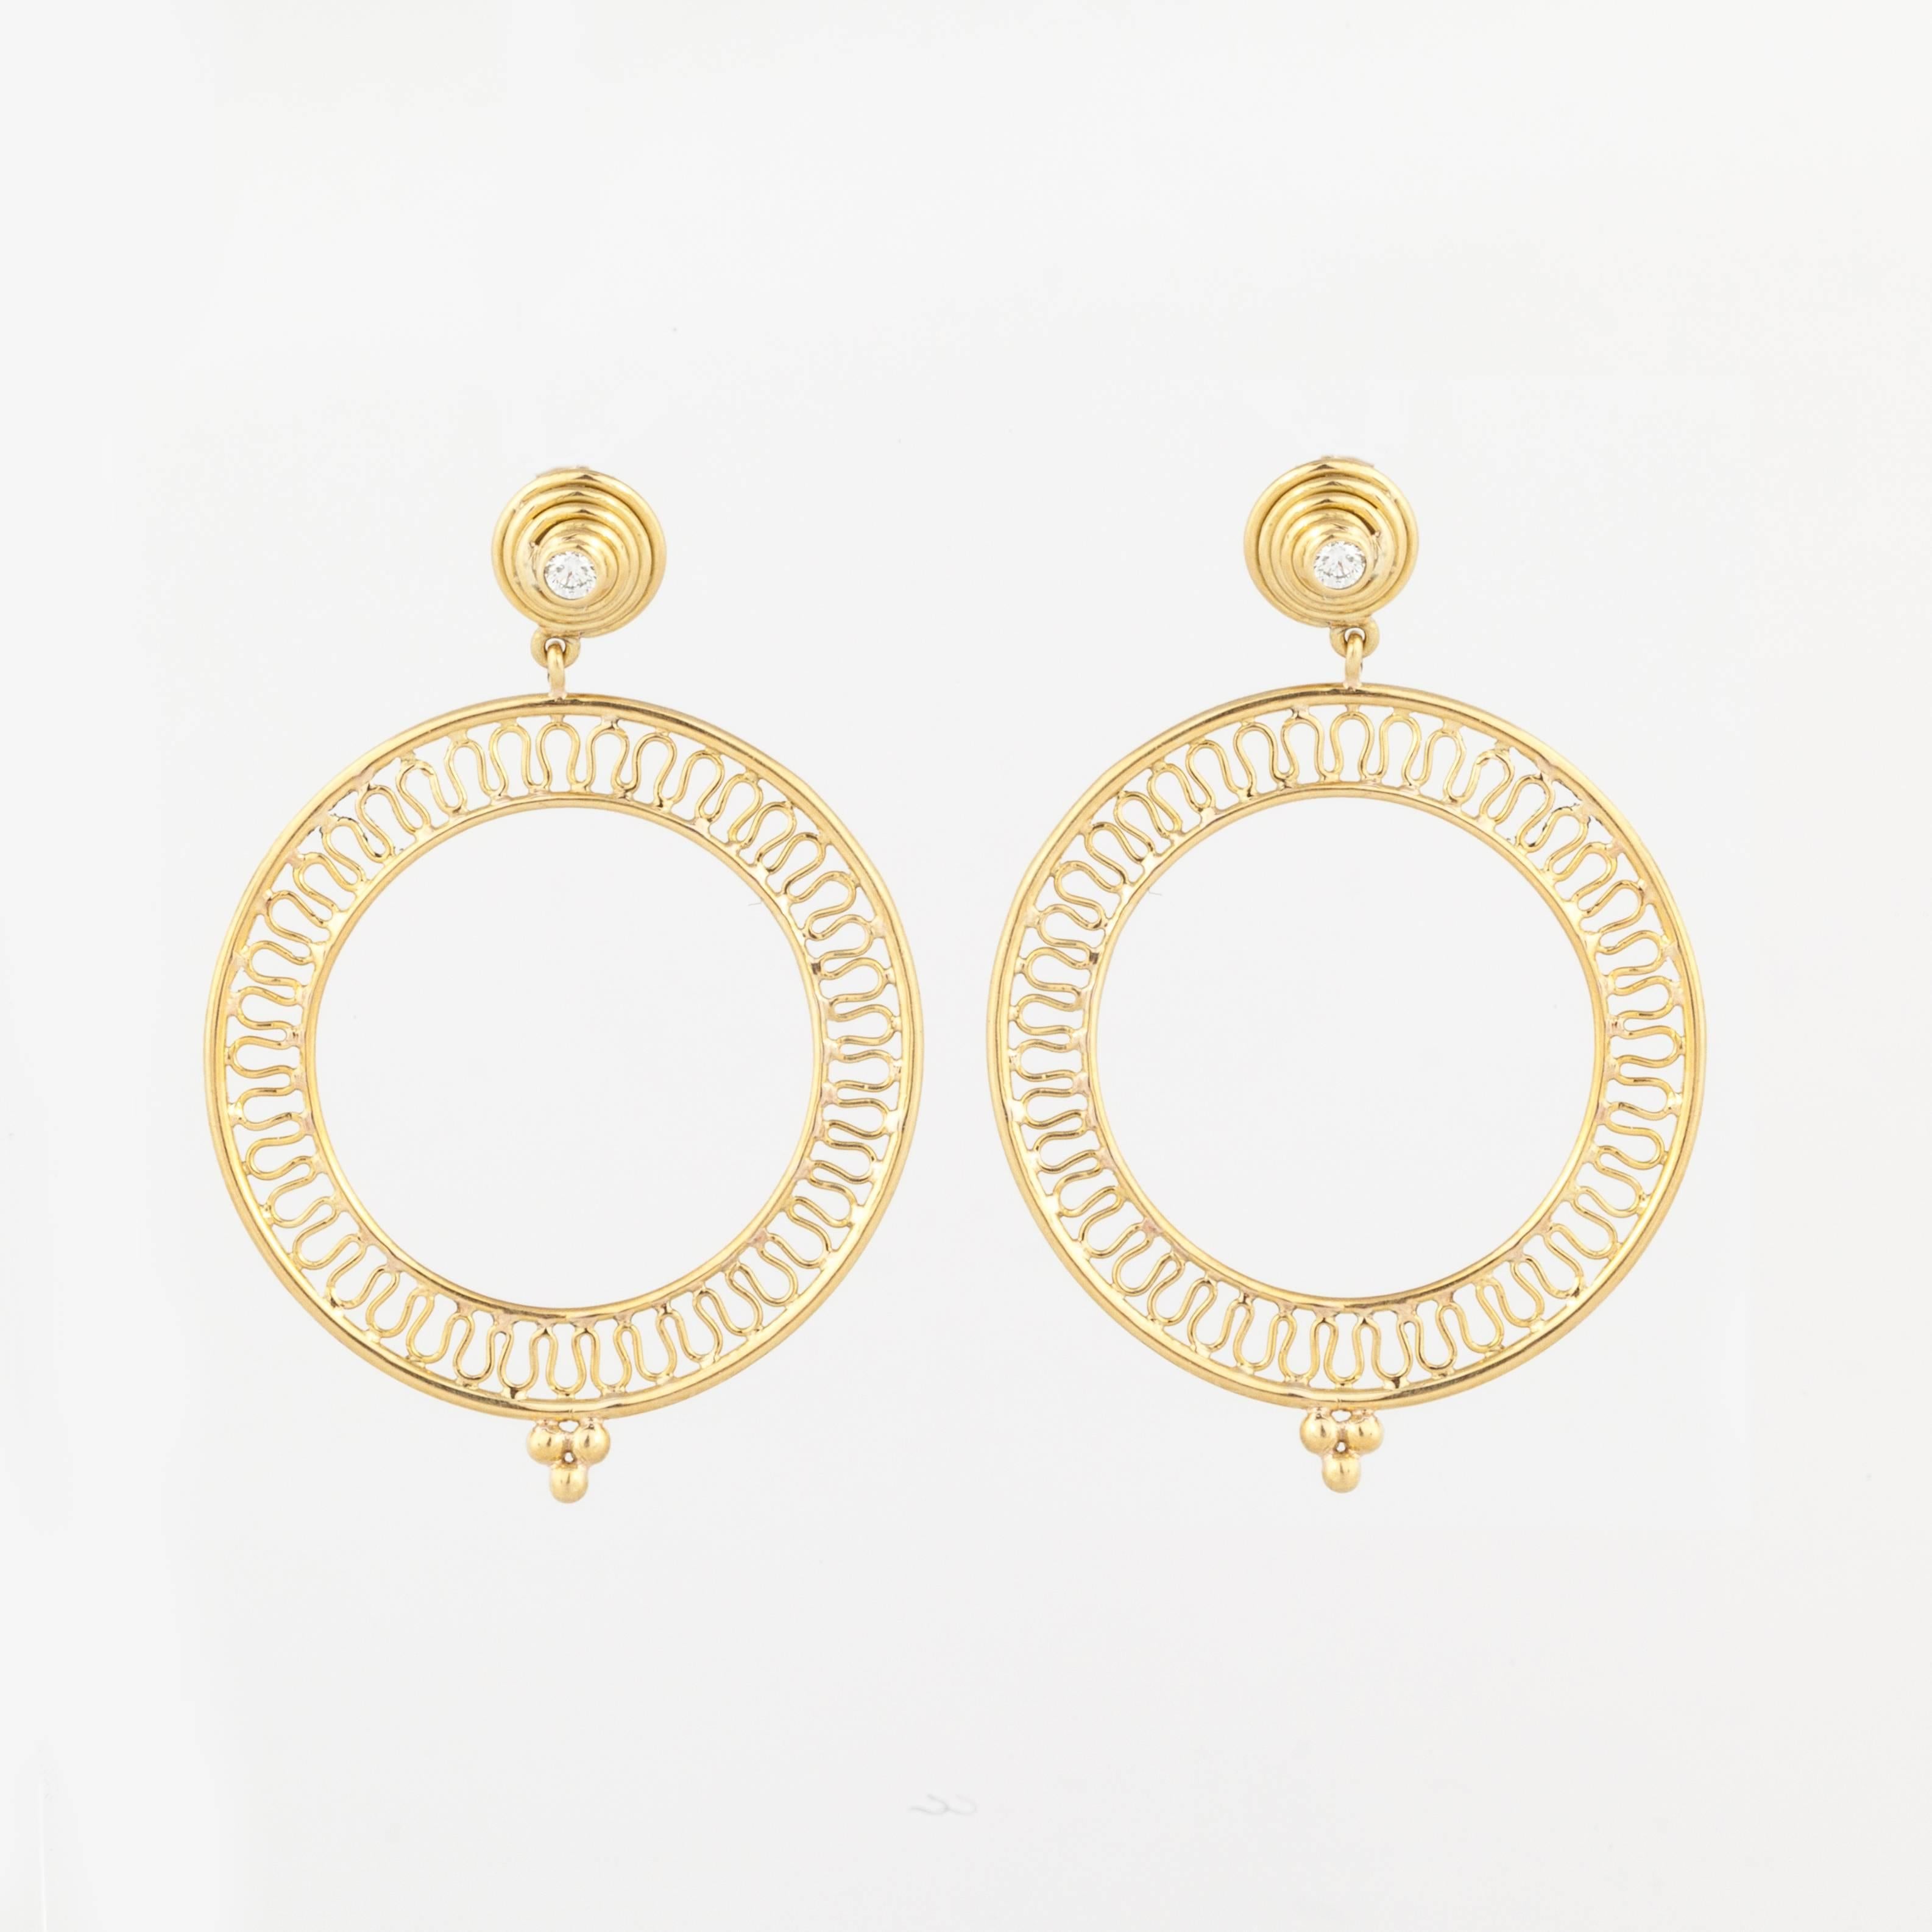 Yellow gold earrings marked 